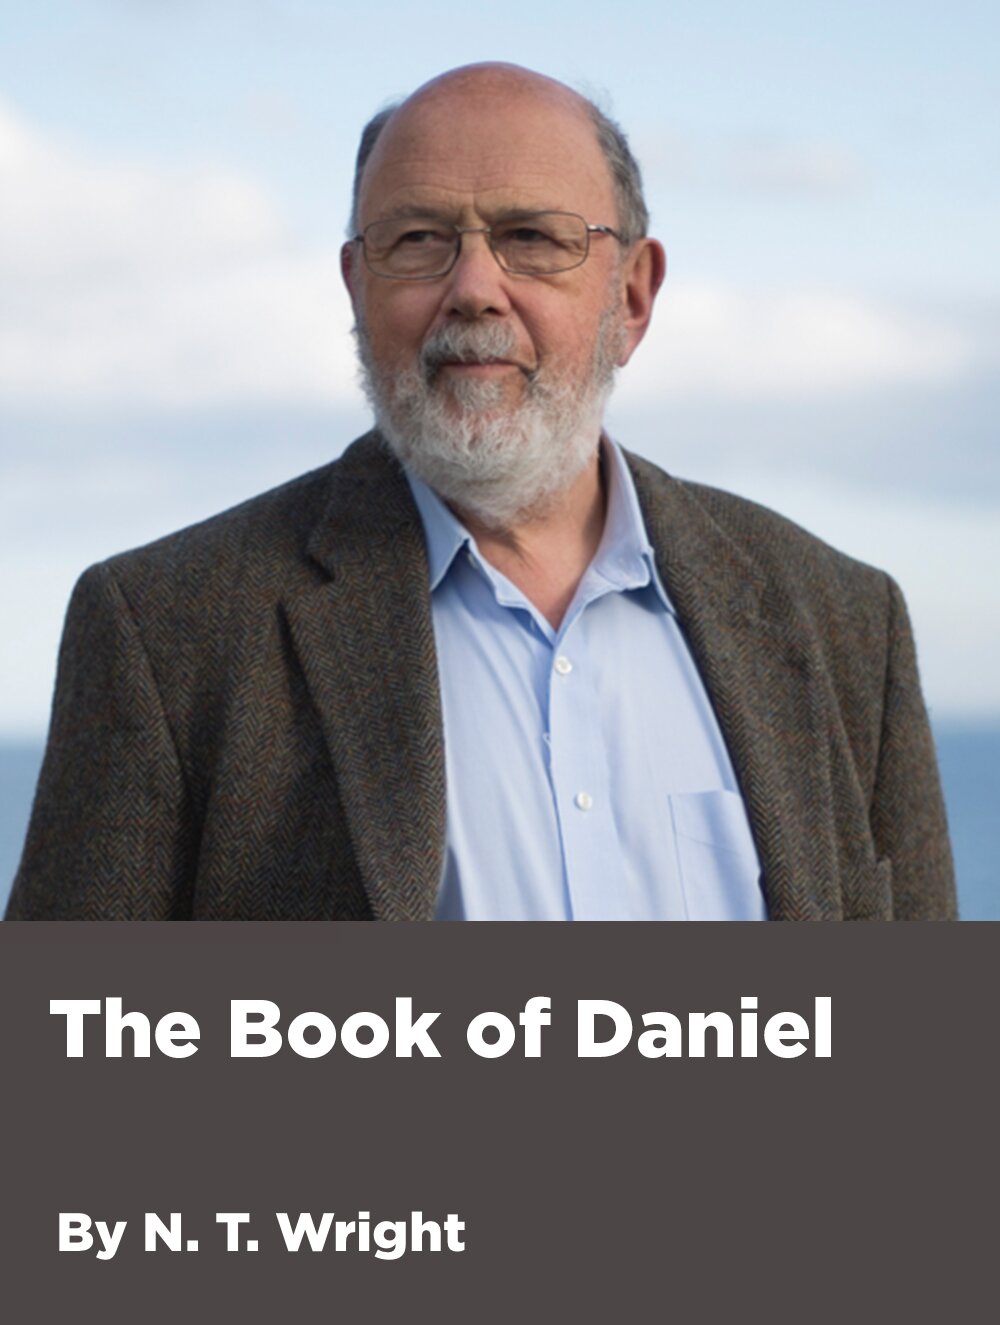 The Book of Daniel (4 hour course)